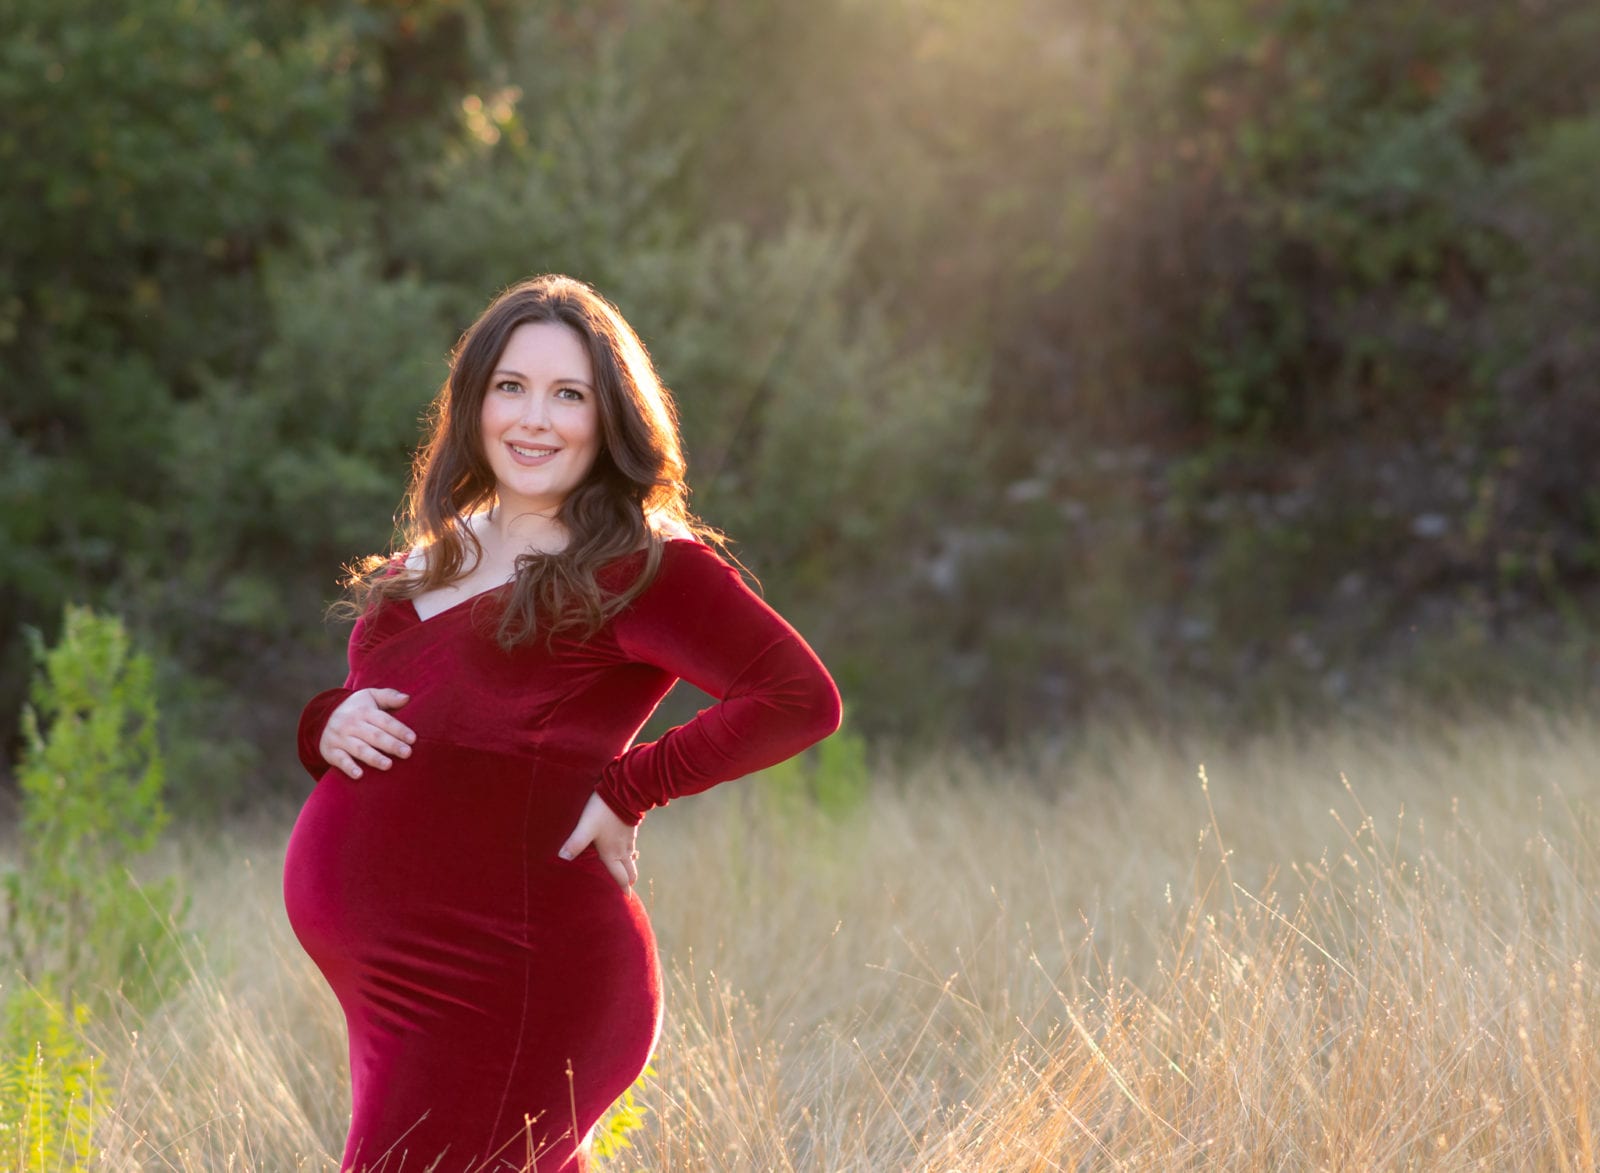 Maternity photos with a red velvet dress.